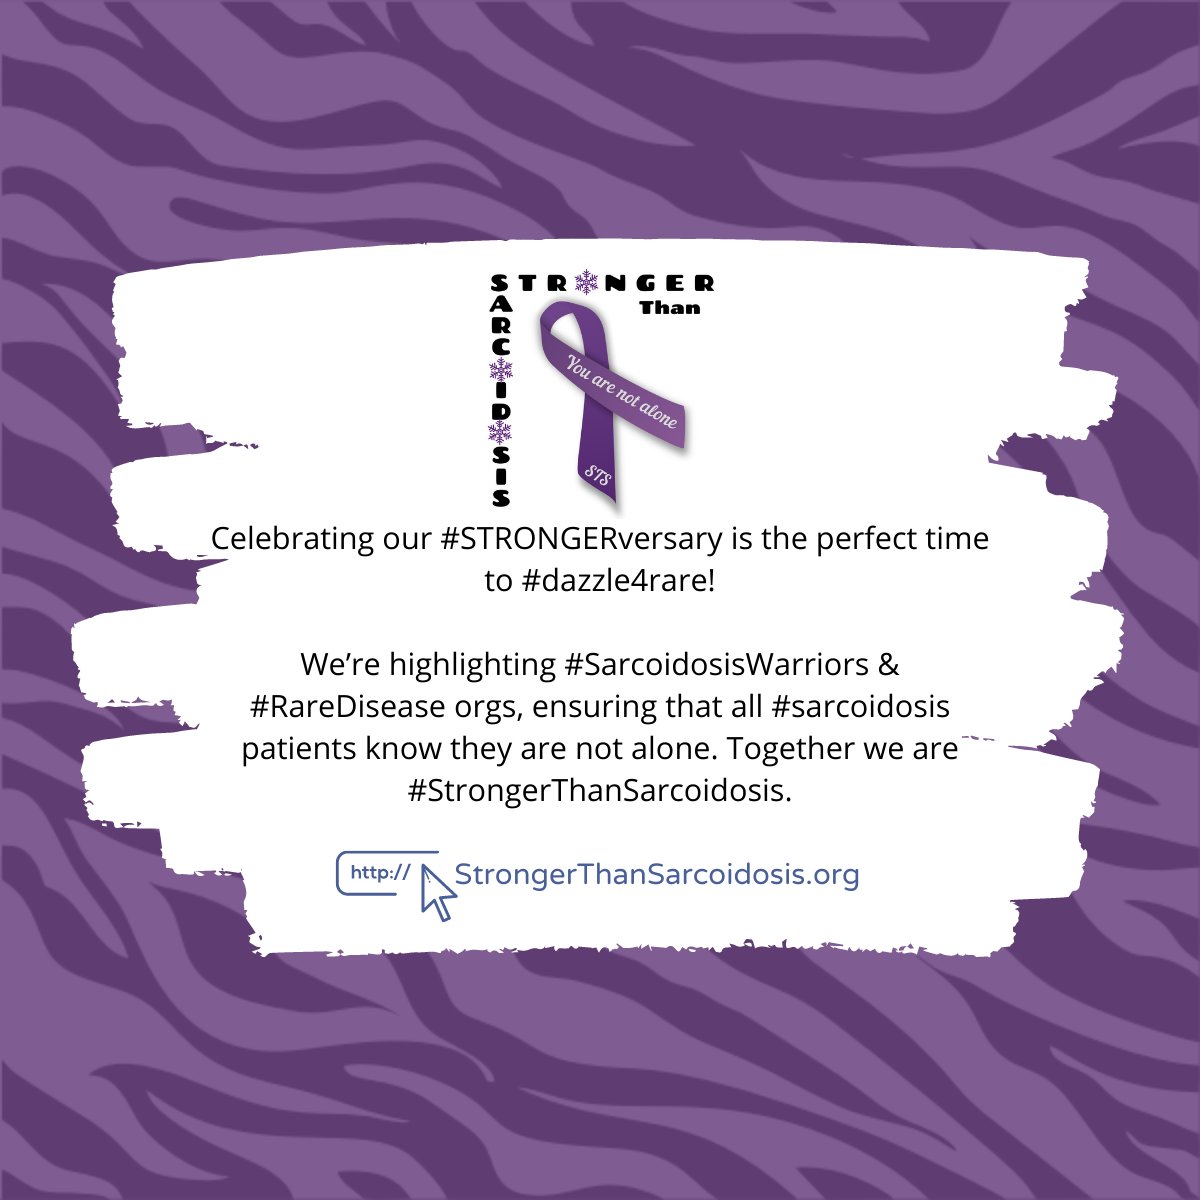 Celebrating our #STRONGERversary is the perfect time to #dazzle4rare!

We're highlighting #SarcoidosisWarriors & #RareDisease orgs, ensuring that all #sarcoidosis patients know they are not alone. Together we are #StrongerThanSarcoidosis pic.twitter.com/Ff8pT0QRcm